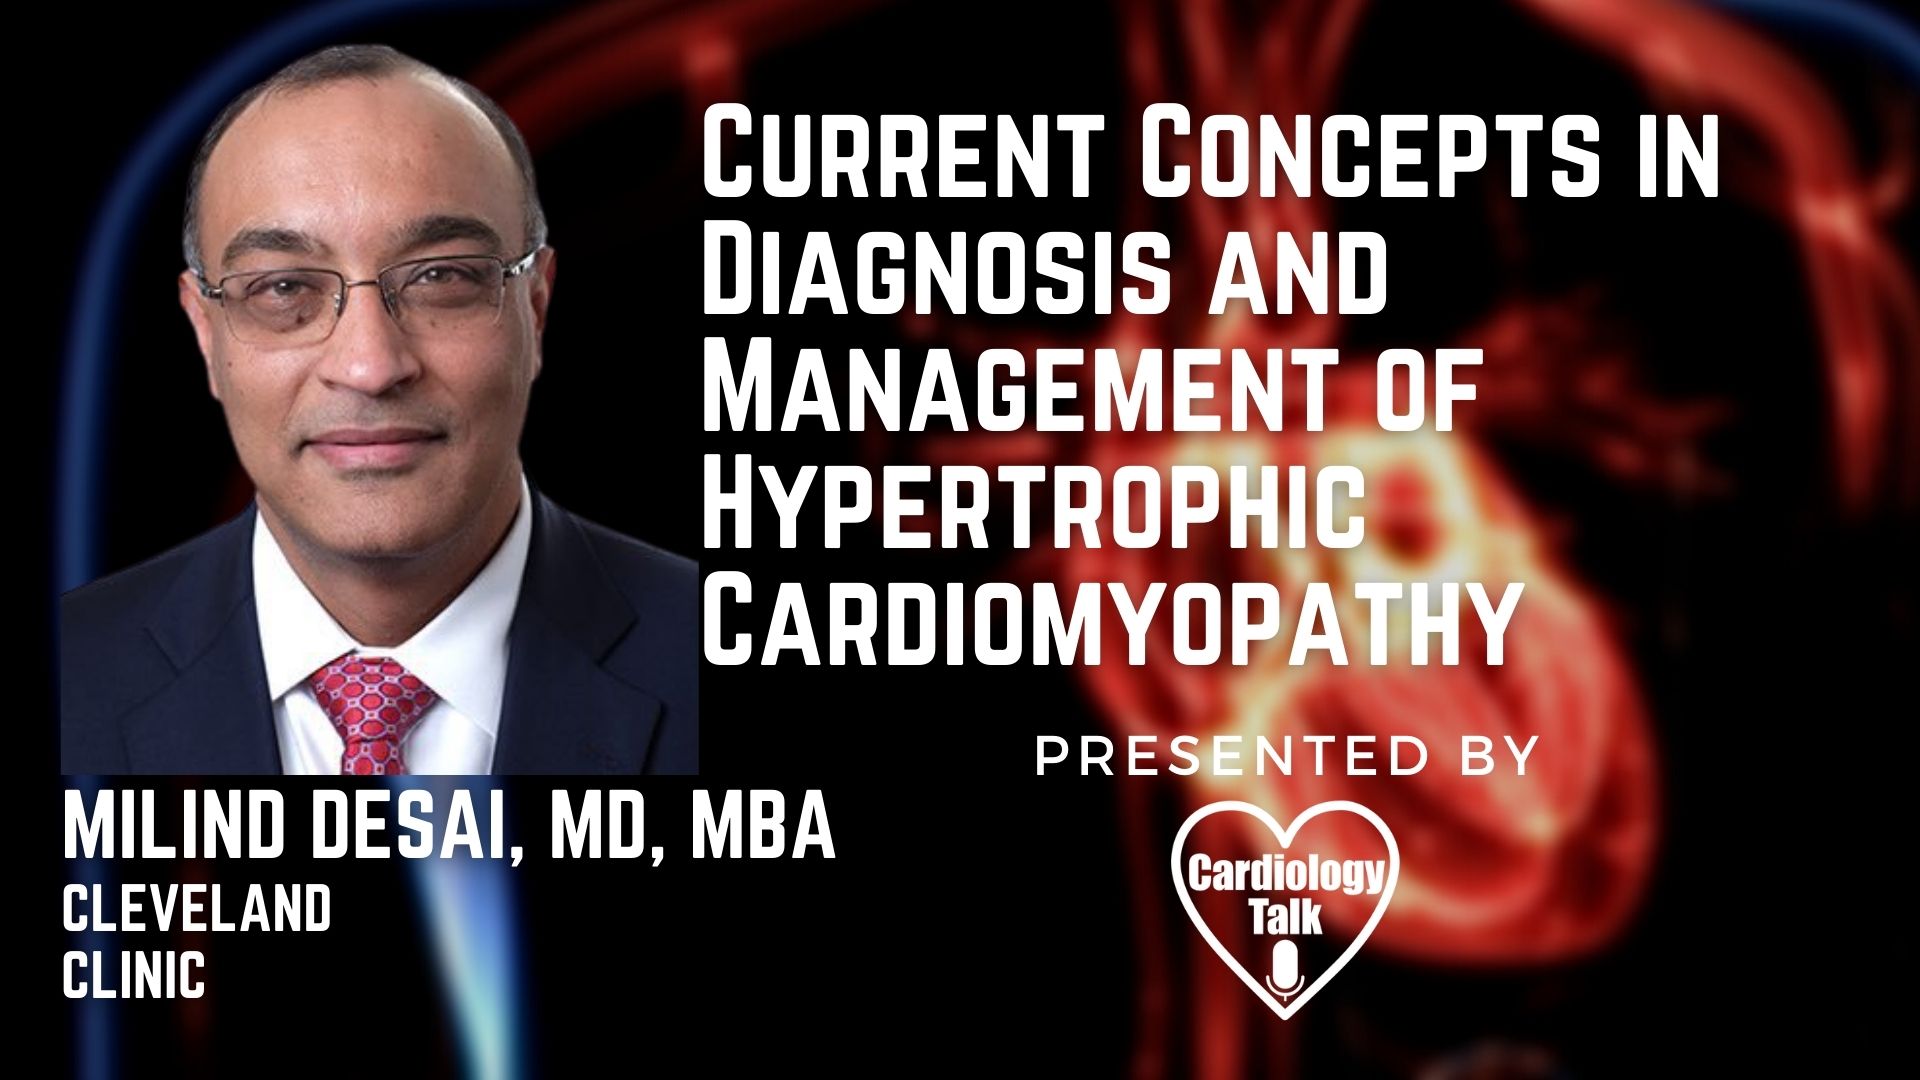 Milind Desai, MD, MBA @DesaiMilindY @ClevelandClinic #HypertrophicCardiomyopathy #Cardiology #Research Current Concepts in Diagnosis and Management of Hypertrophic Cardiomyopathy